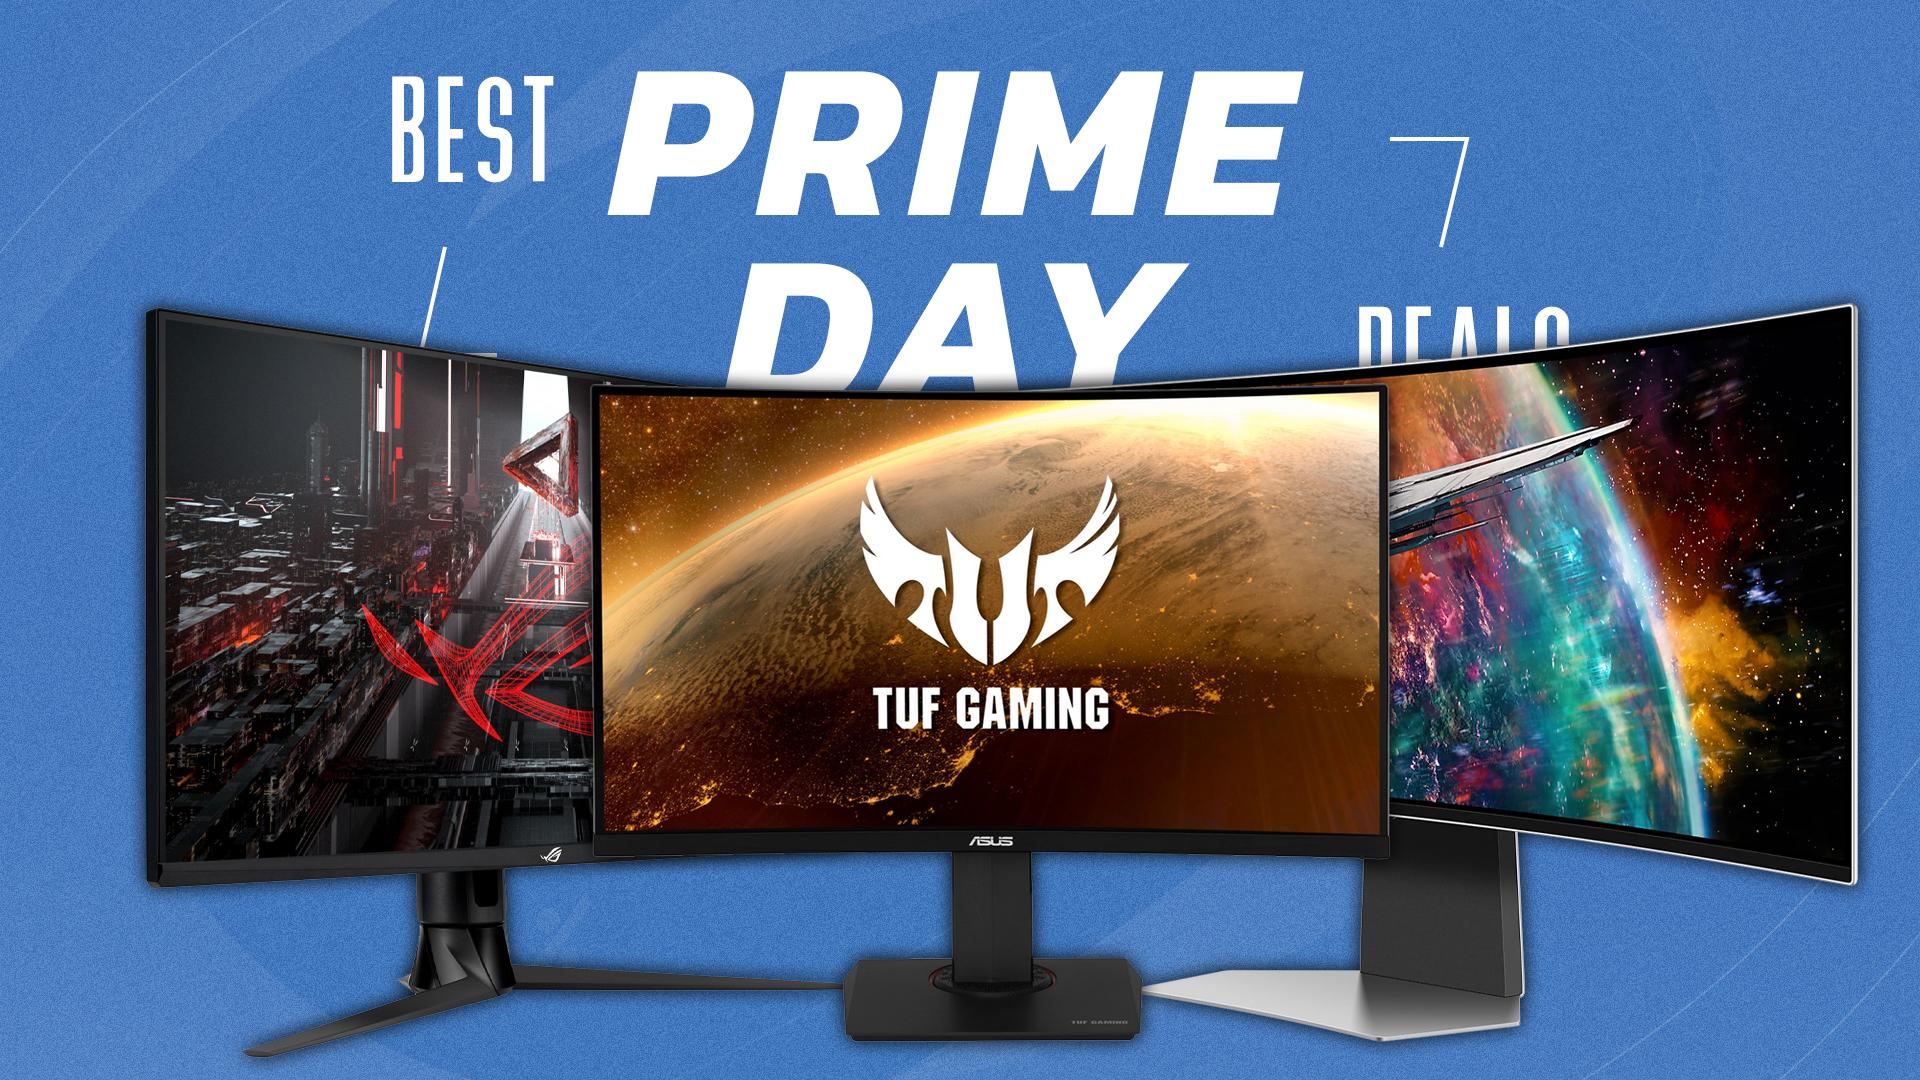 Prime Day Deals Reddit Users Are Recommending Right Now - IGN